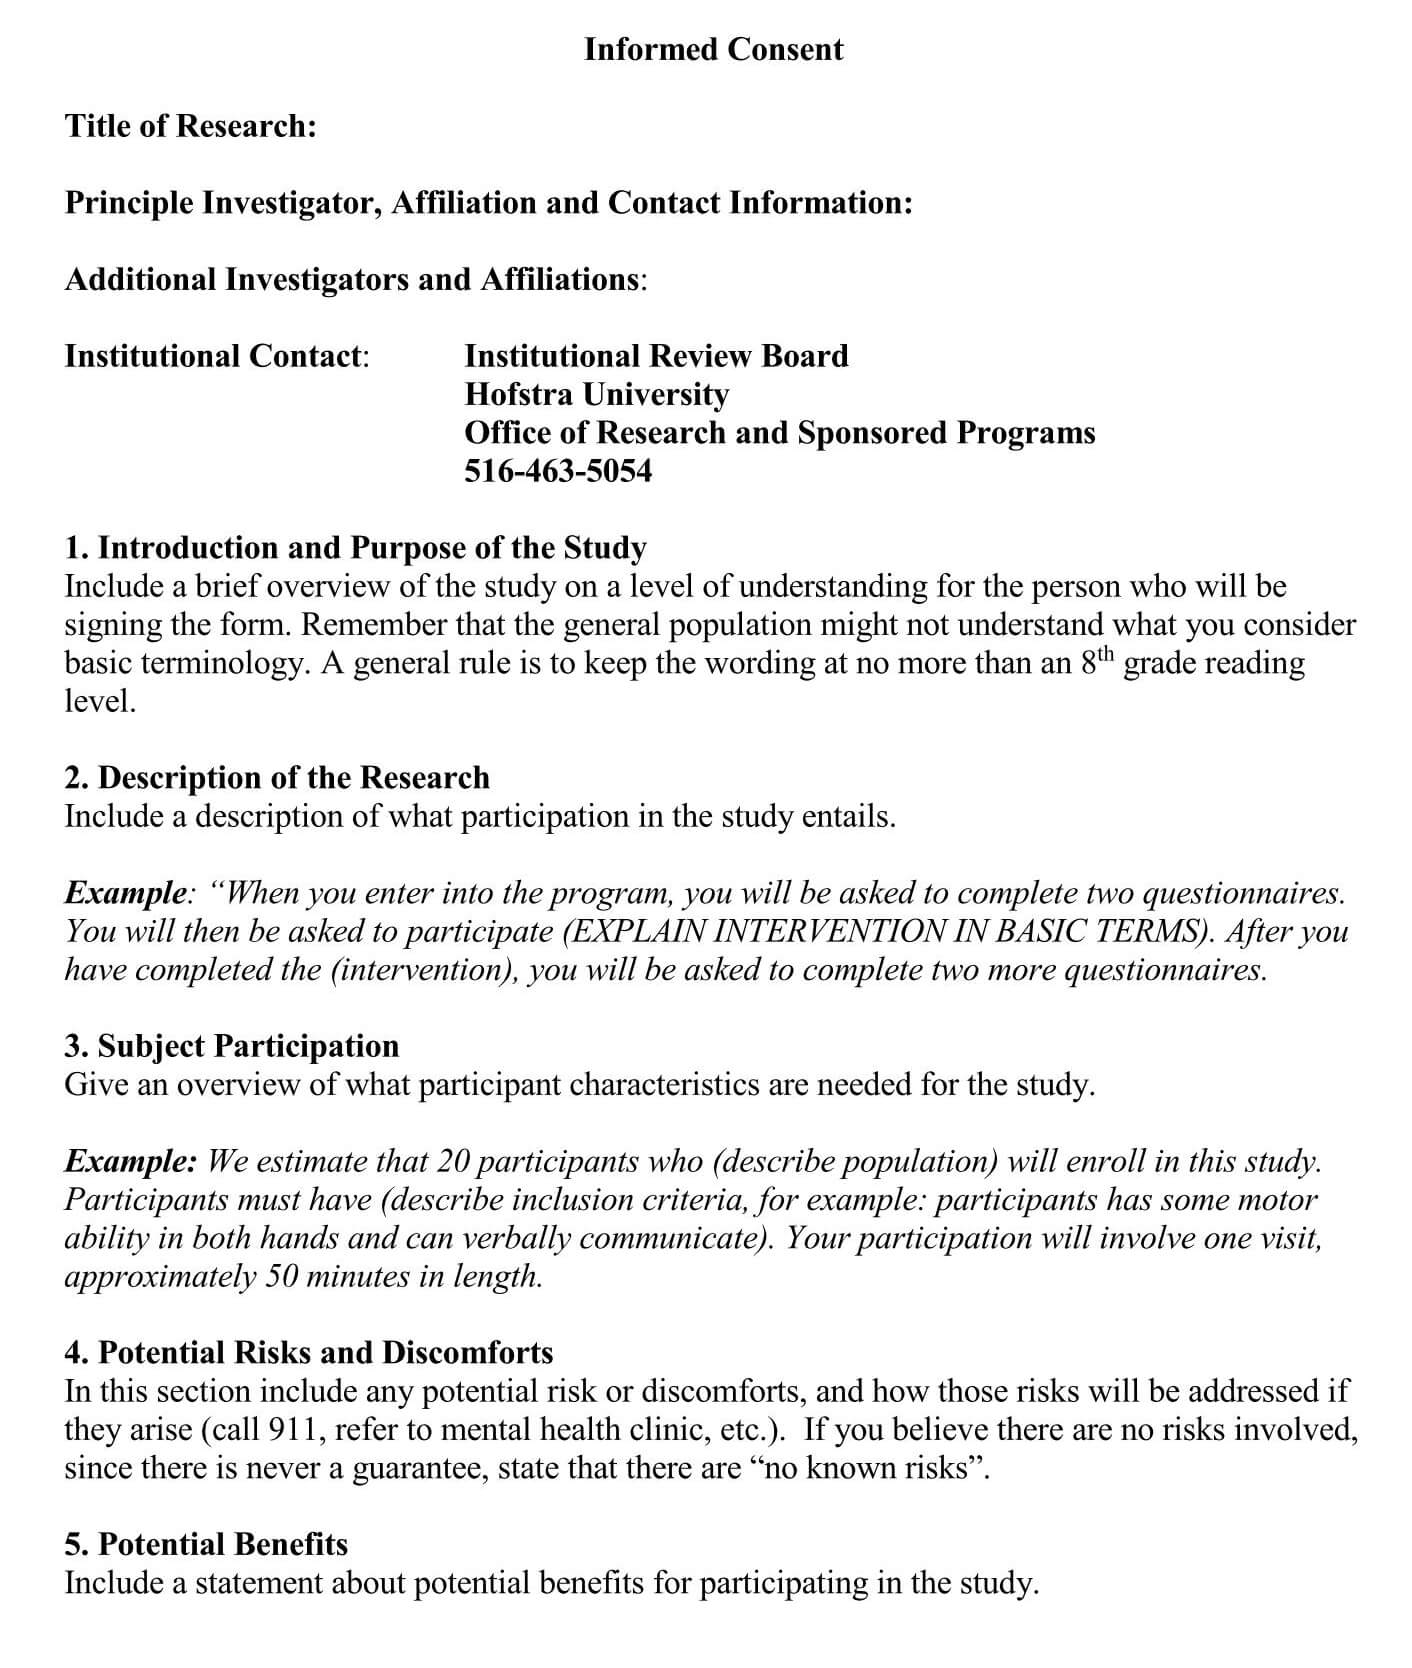 Free Research Informed Consent Forms Templates Word Pdf